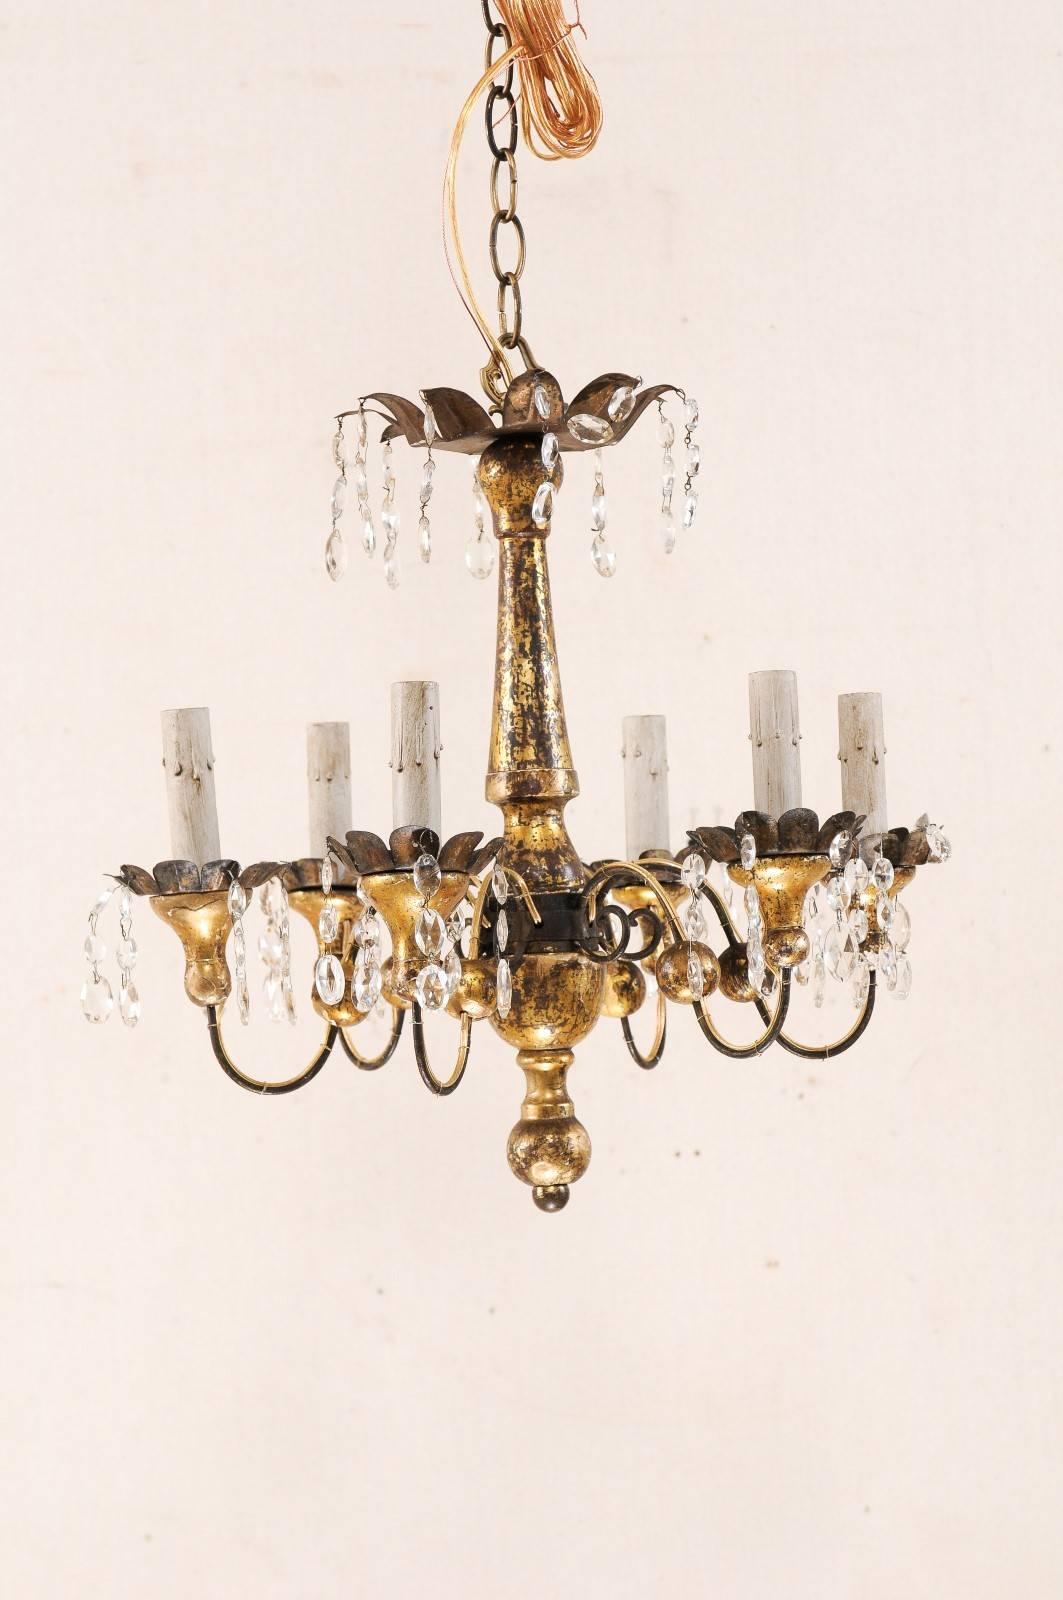 A pair of French six-light painted wood and crystal chandelier from the mid-20th century. This pair of vintage French chandeliers features a turned wood central column, with decoratively cut metal canopy adorn with crystals. From the centre column,